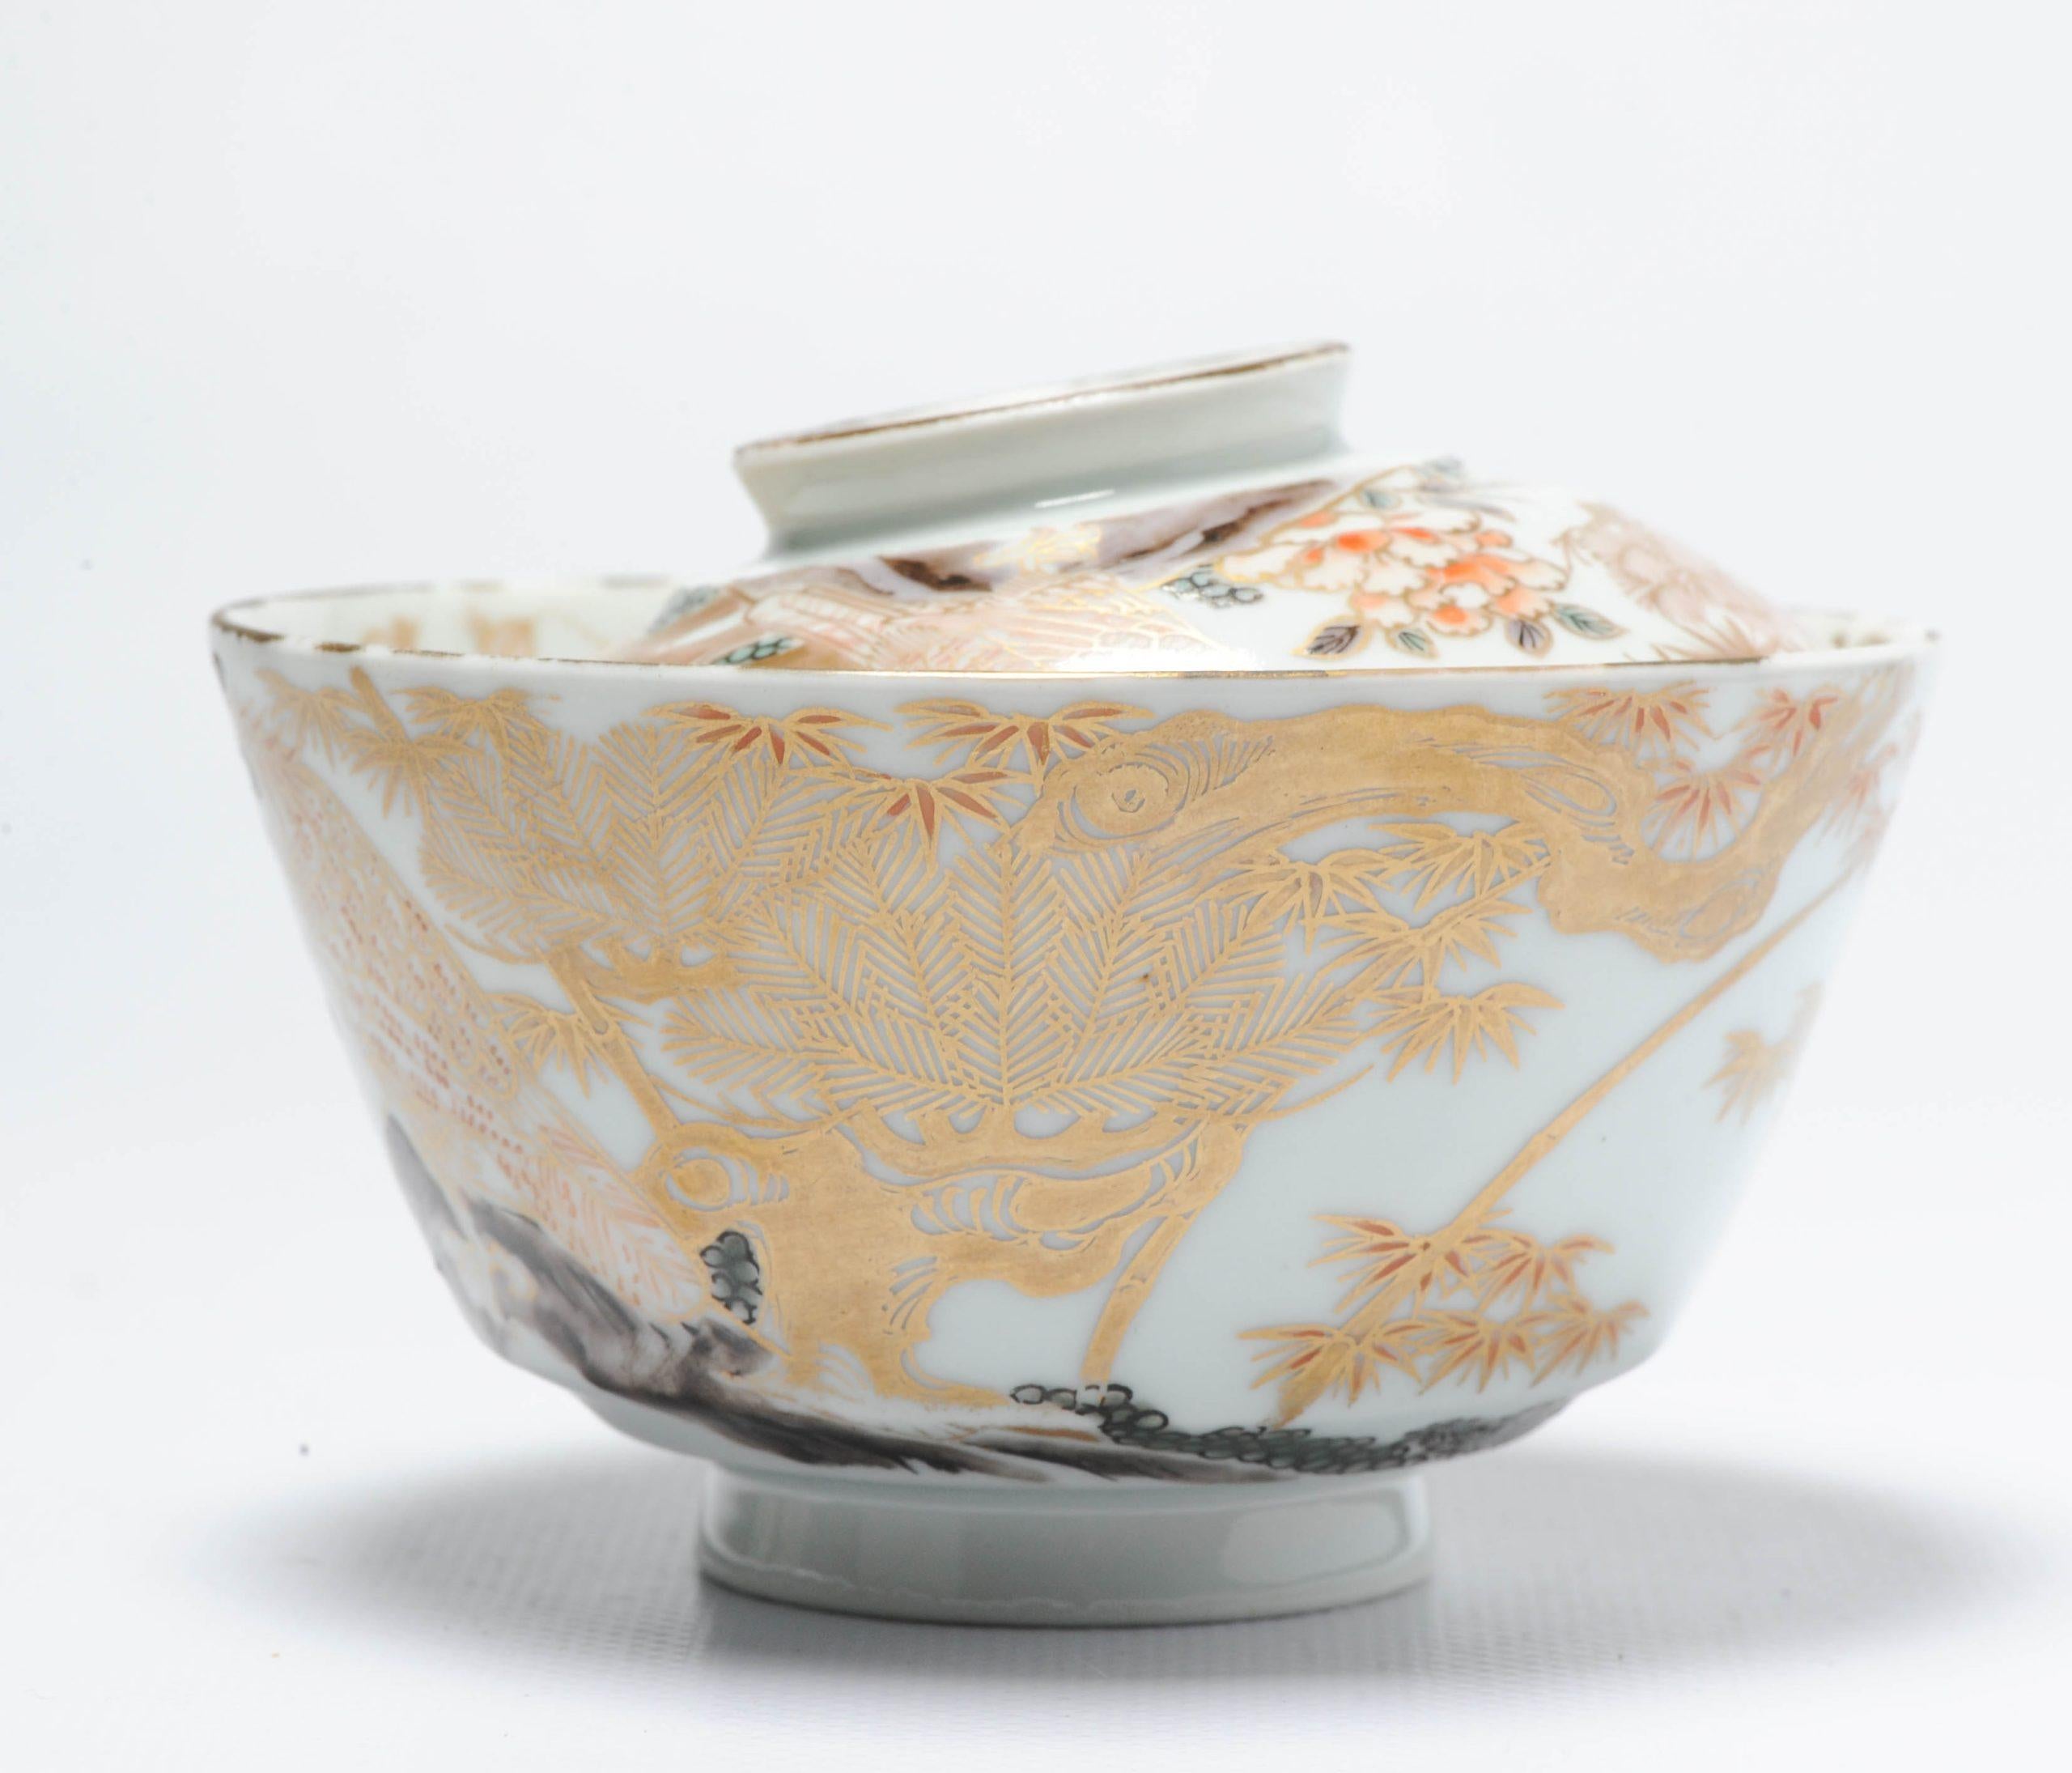 Gold' Imari, decorated in gold, iron-red, birds of prey and flowering plants and insects.

This is a beautiful example of 'gold' Imari. No underglaze blue or other enamel colors have been used, and the thin rosy layer of gold provides sufficient